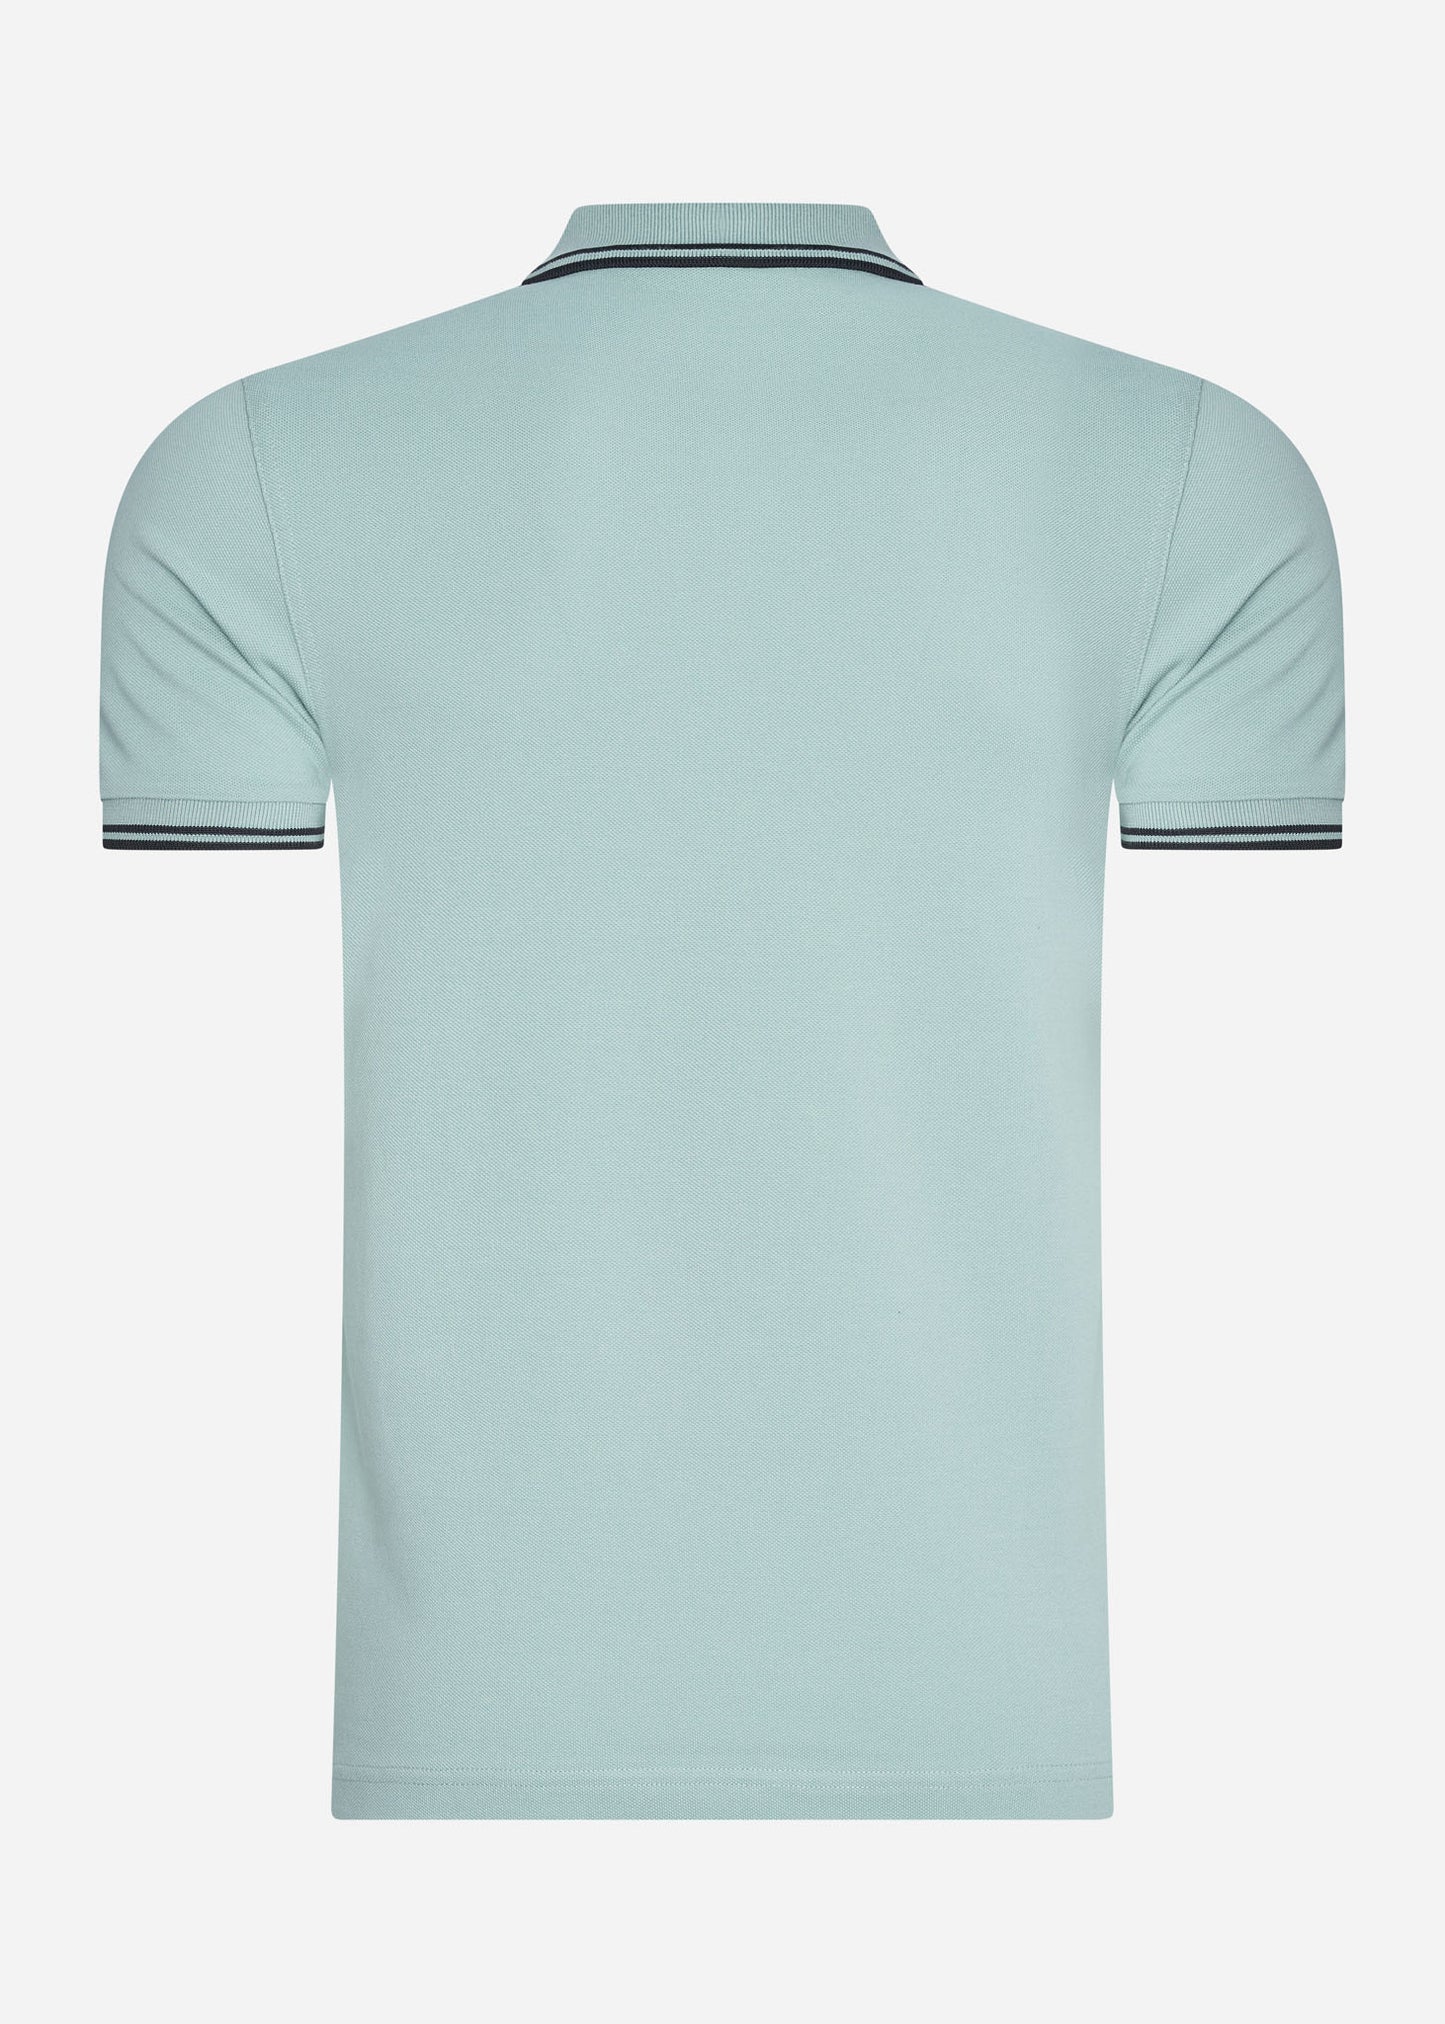 Twin tipped fred perry shirt - silver blue black - Fred Perry